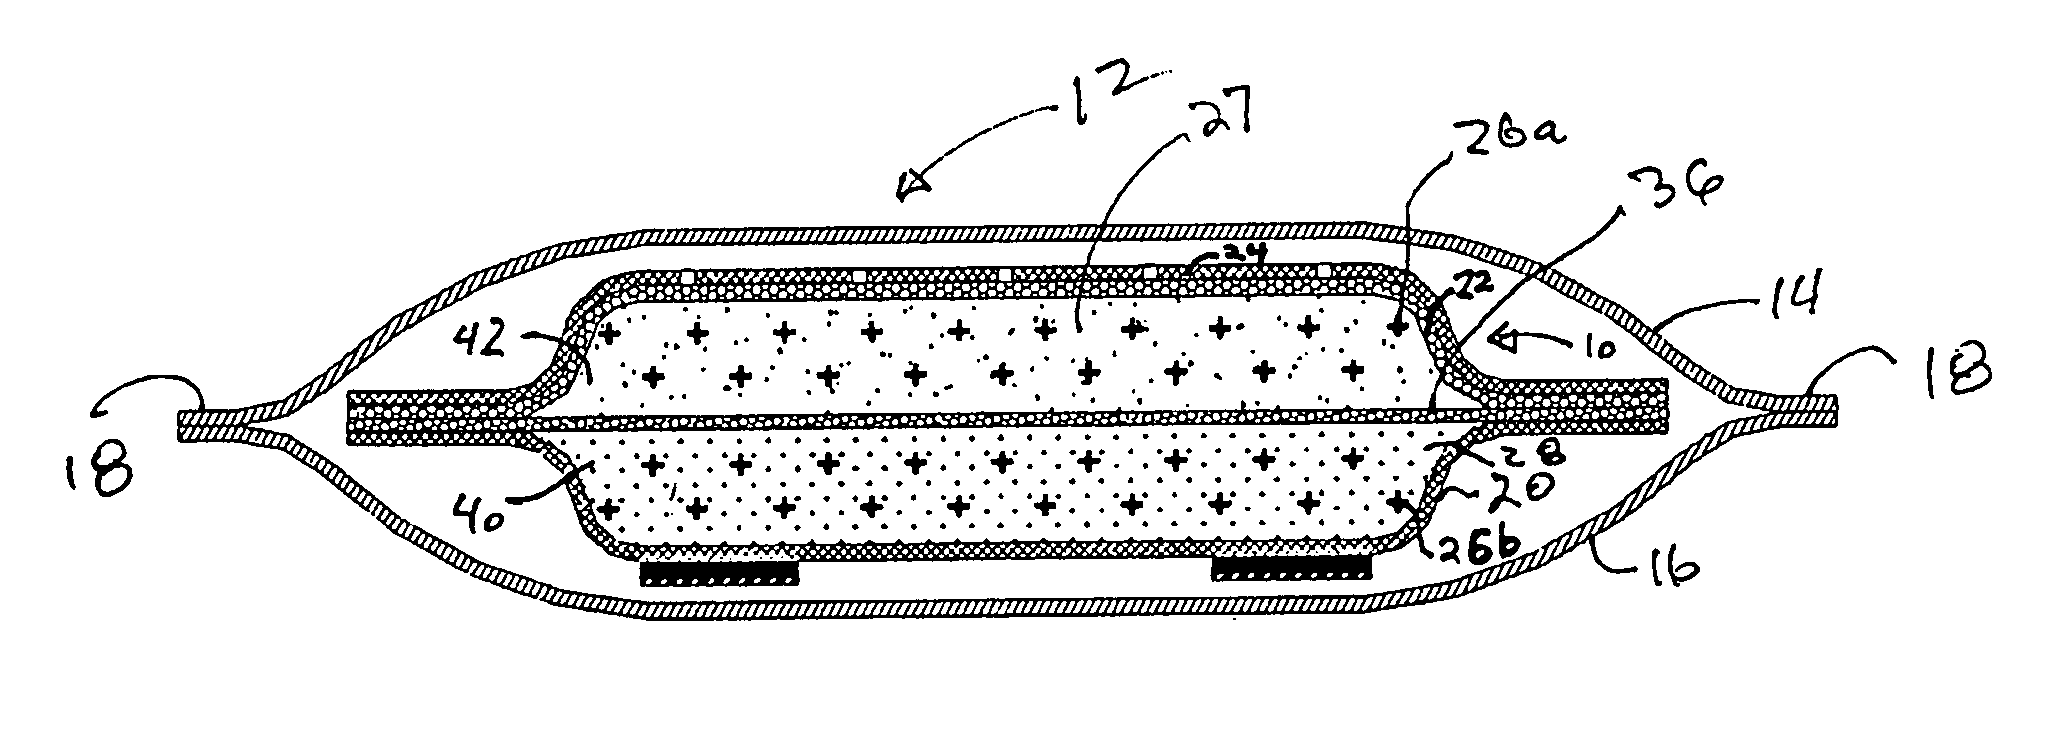 Warming pack with temperature uniformity and temperature stabilization